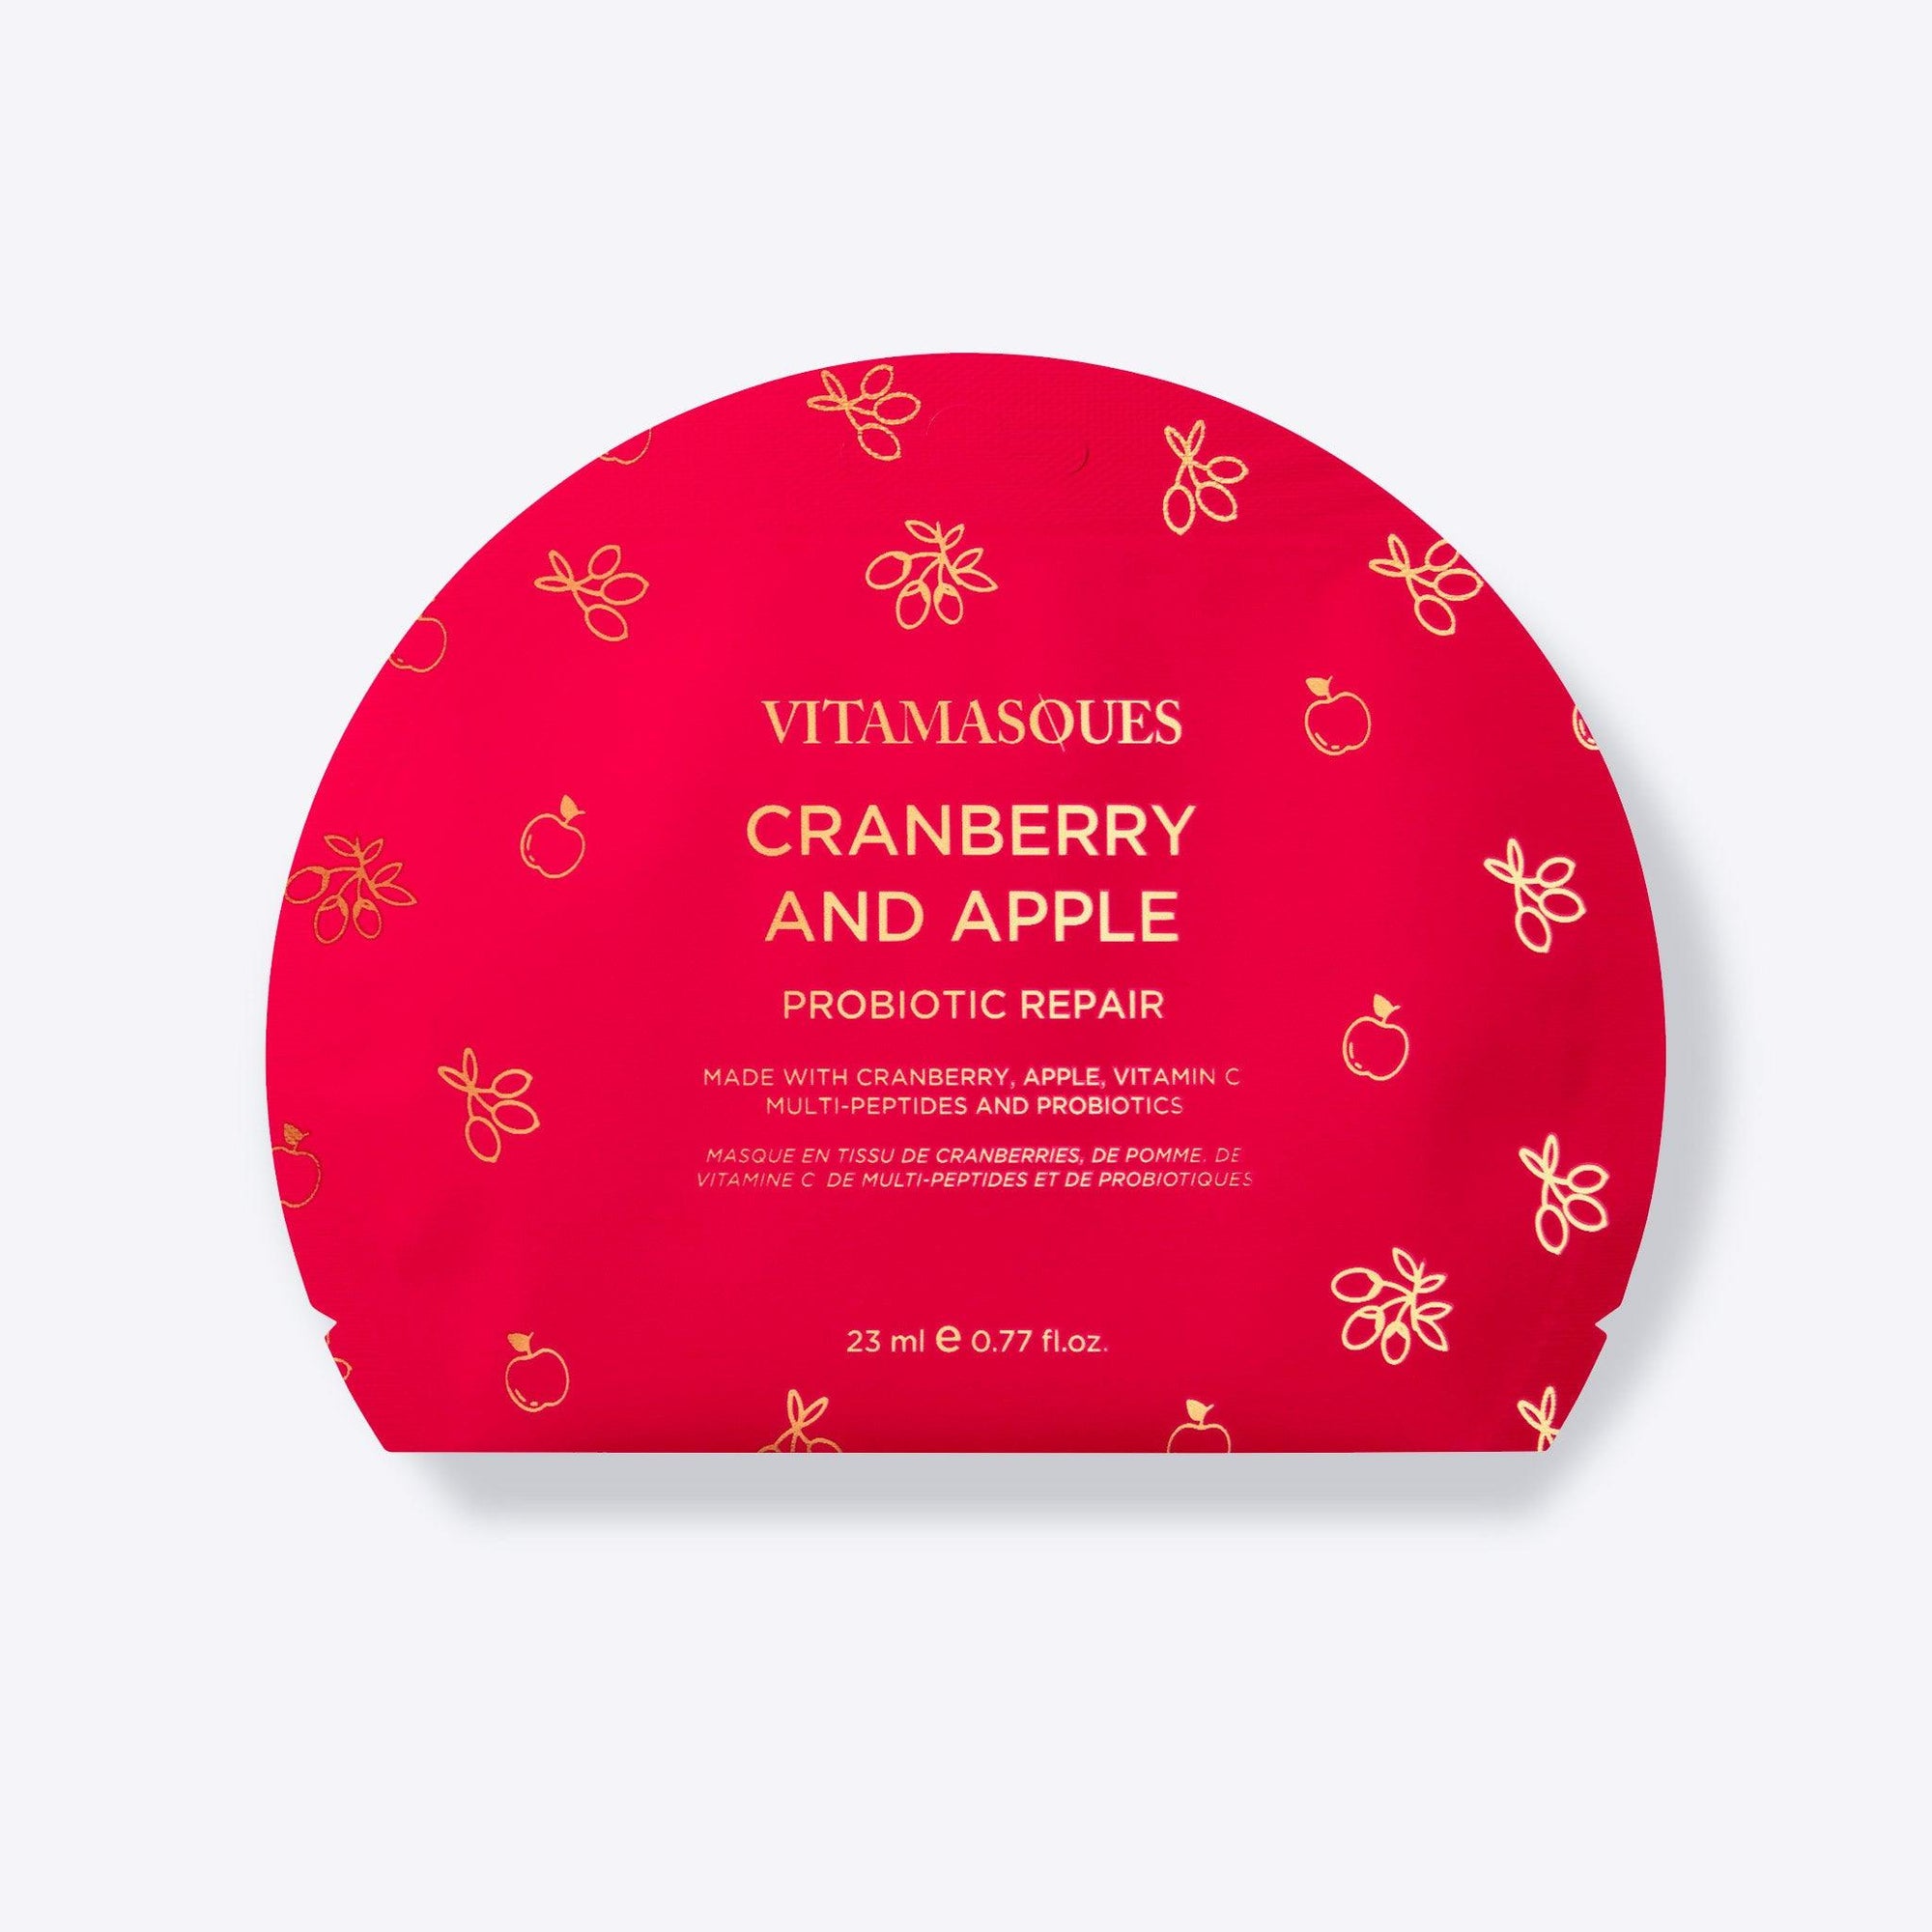 Cranberry & Apple Face Sheet Mask (Limited Edition) - Vitamasques